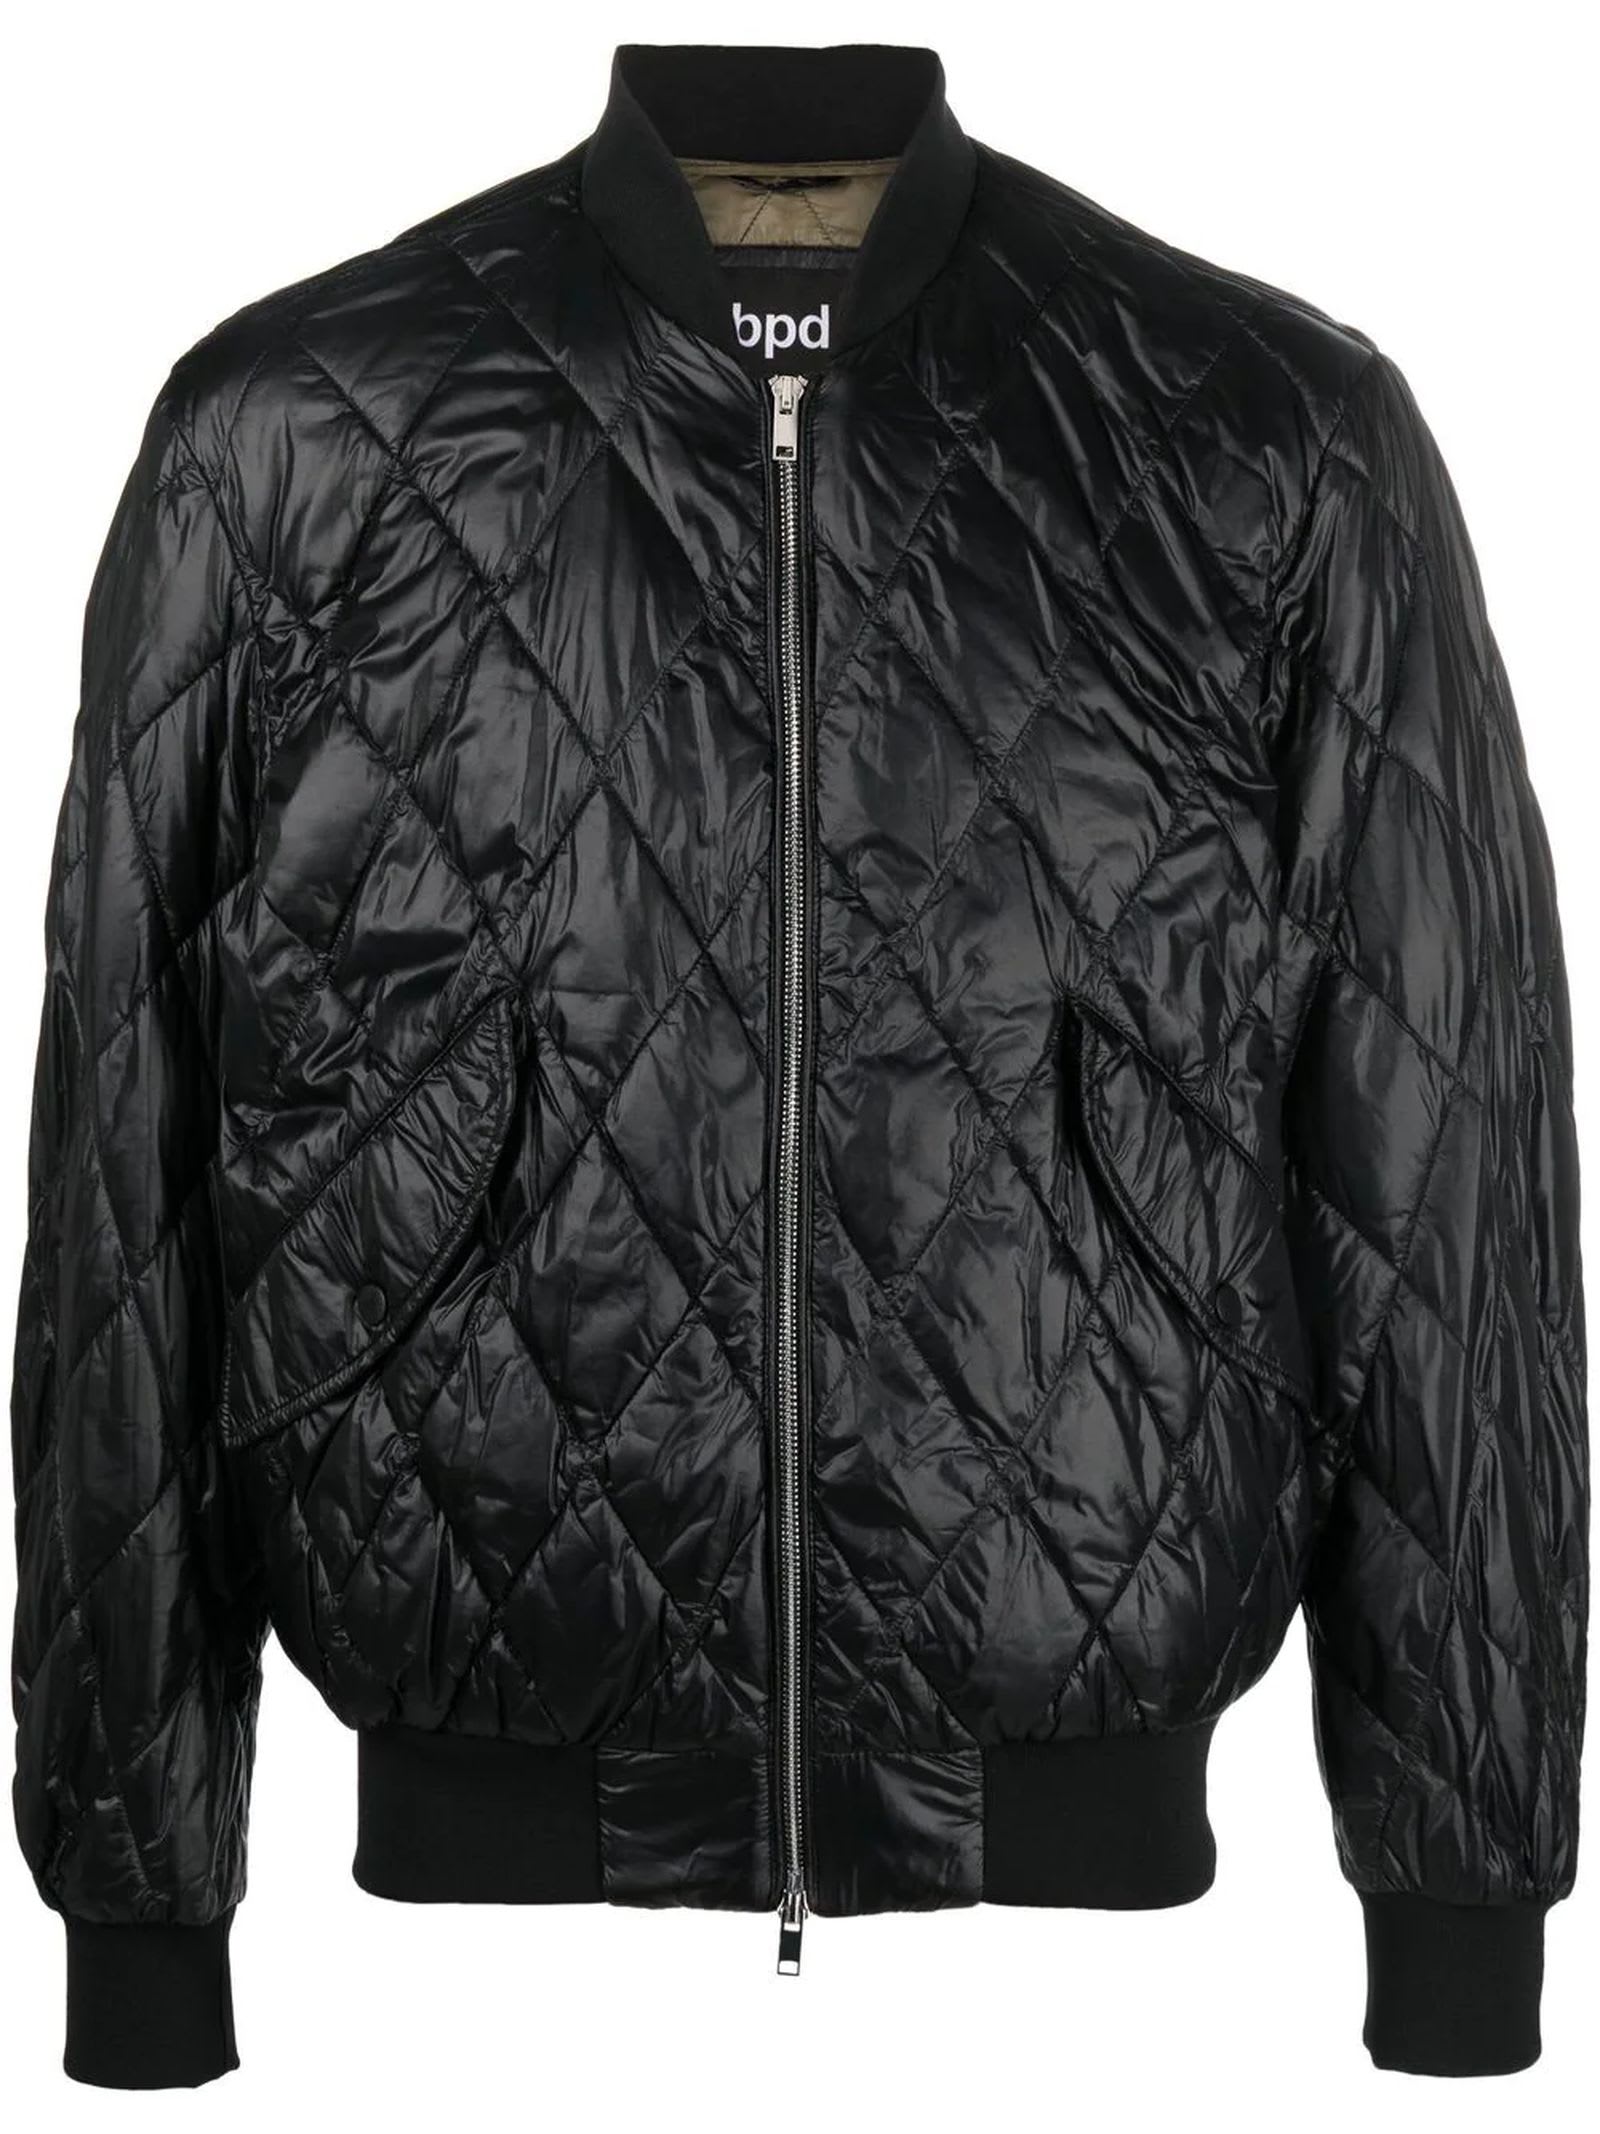 Bpd (Be Proud of this stress) Black Padded Jacket